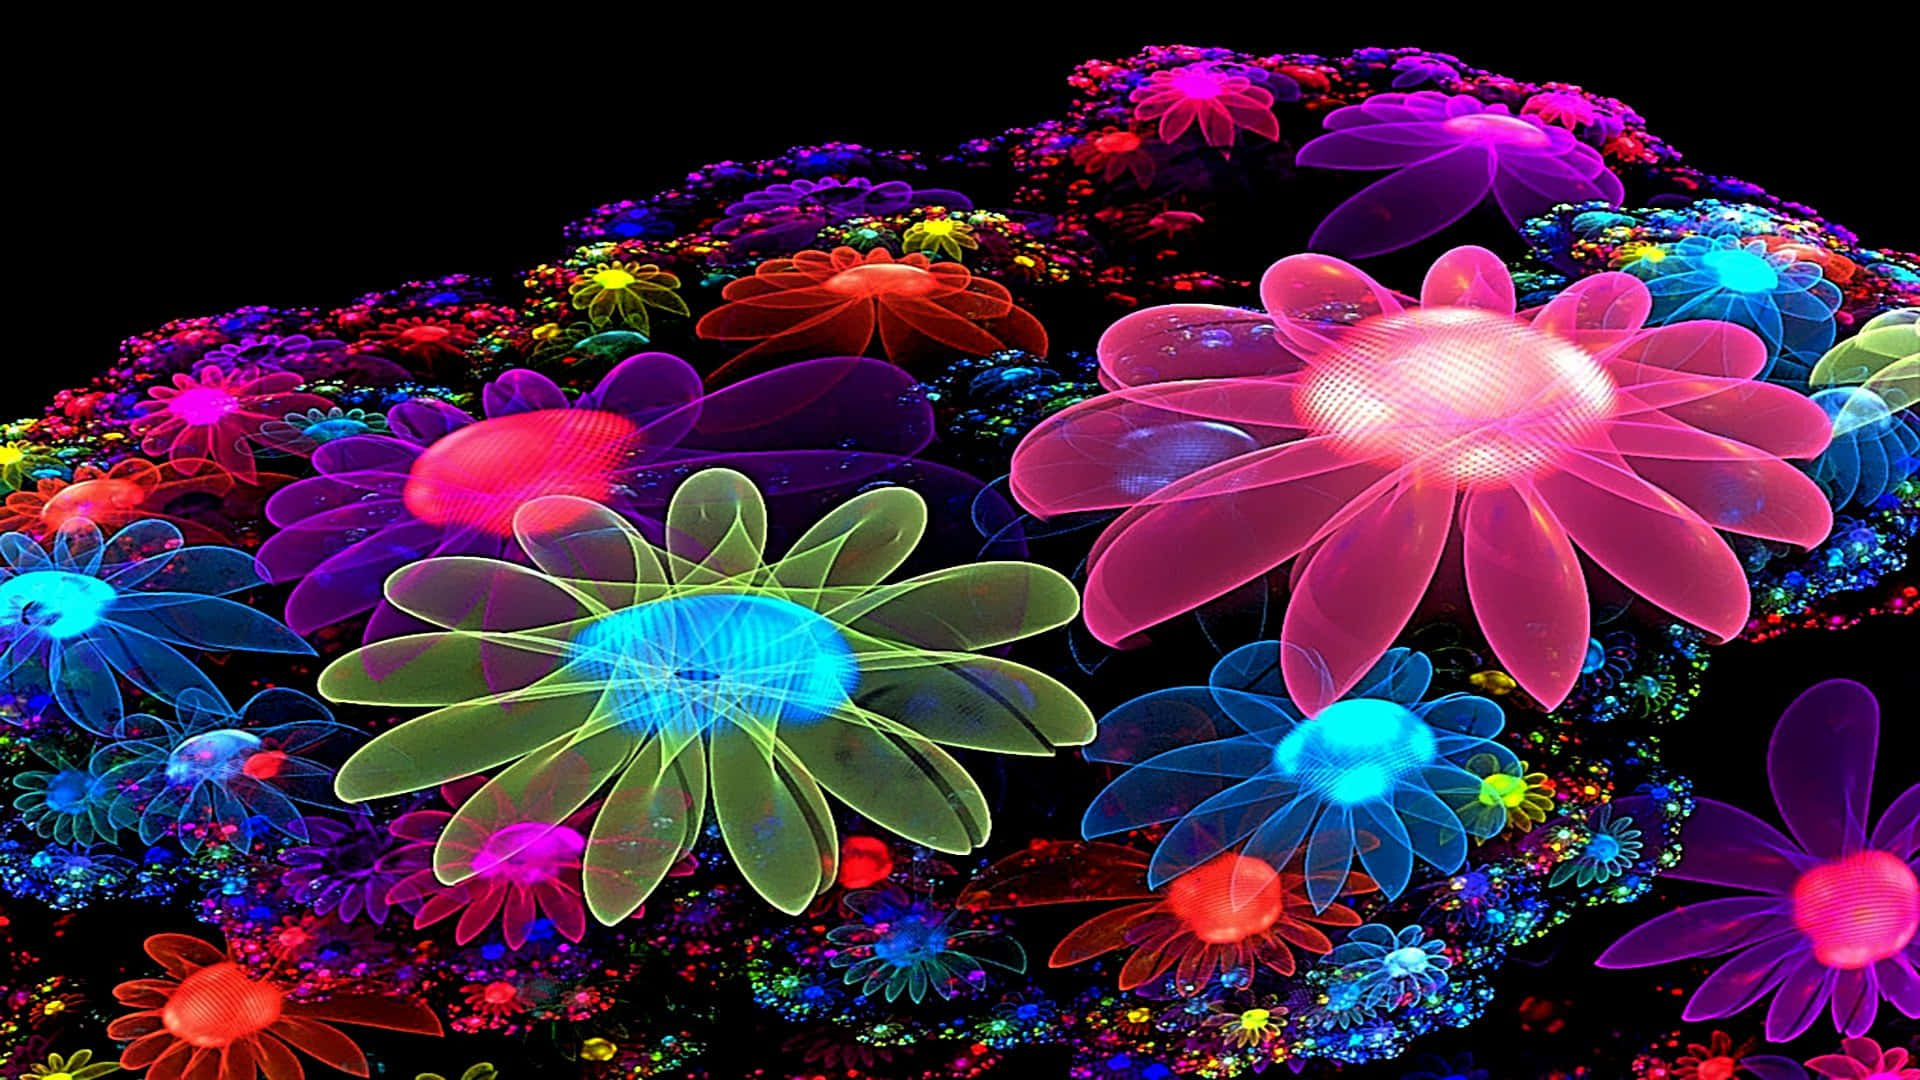 Download A beautiful vibrant display of neon flowers in bloom Wallpaper